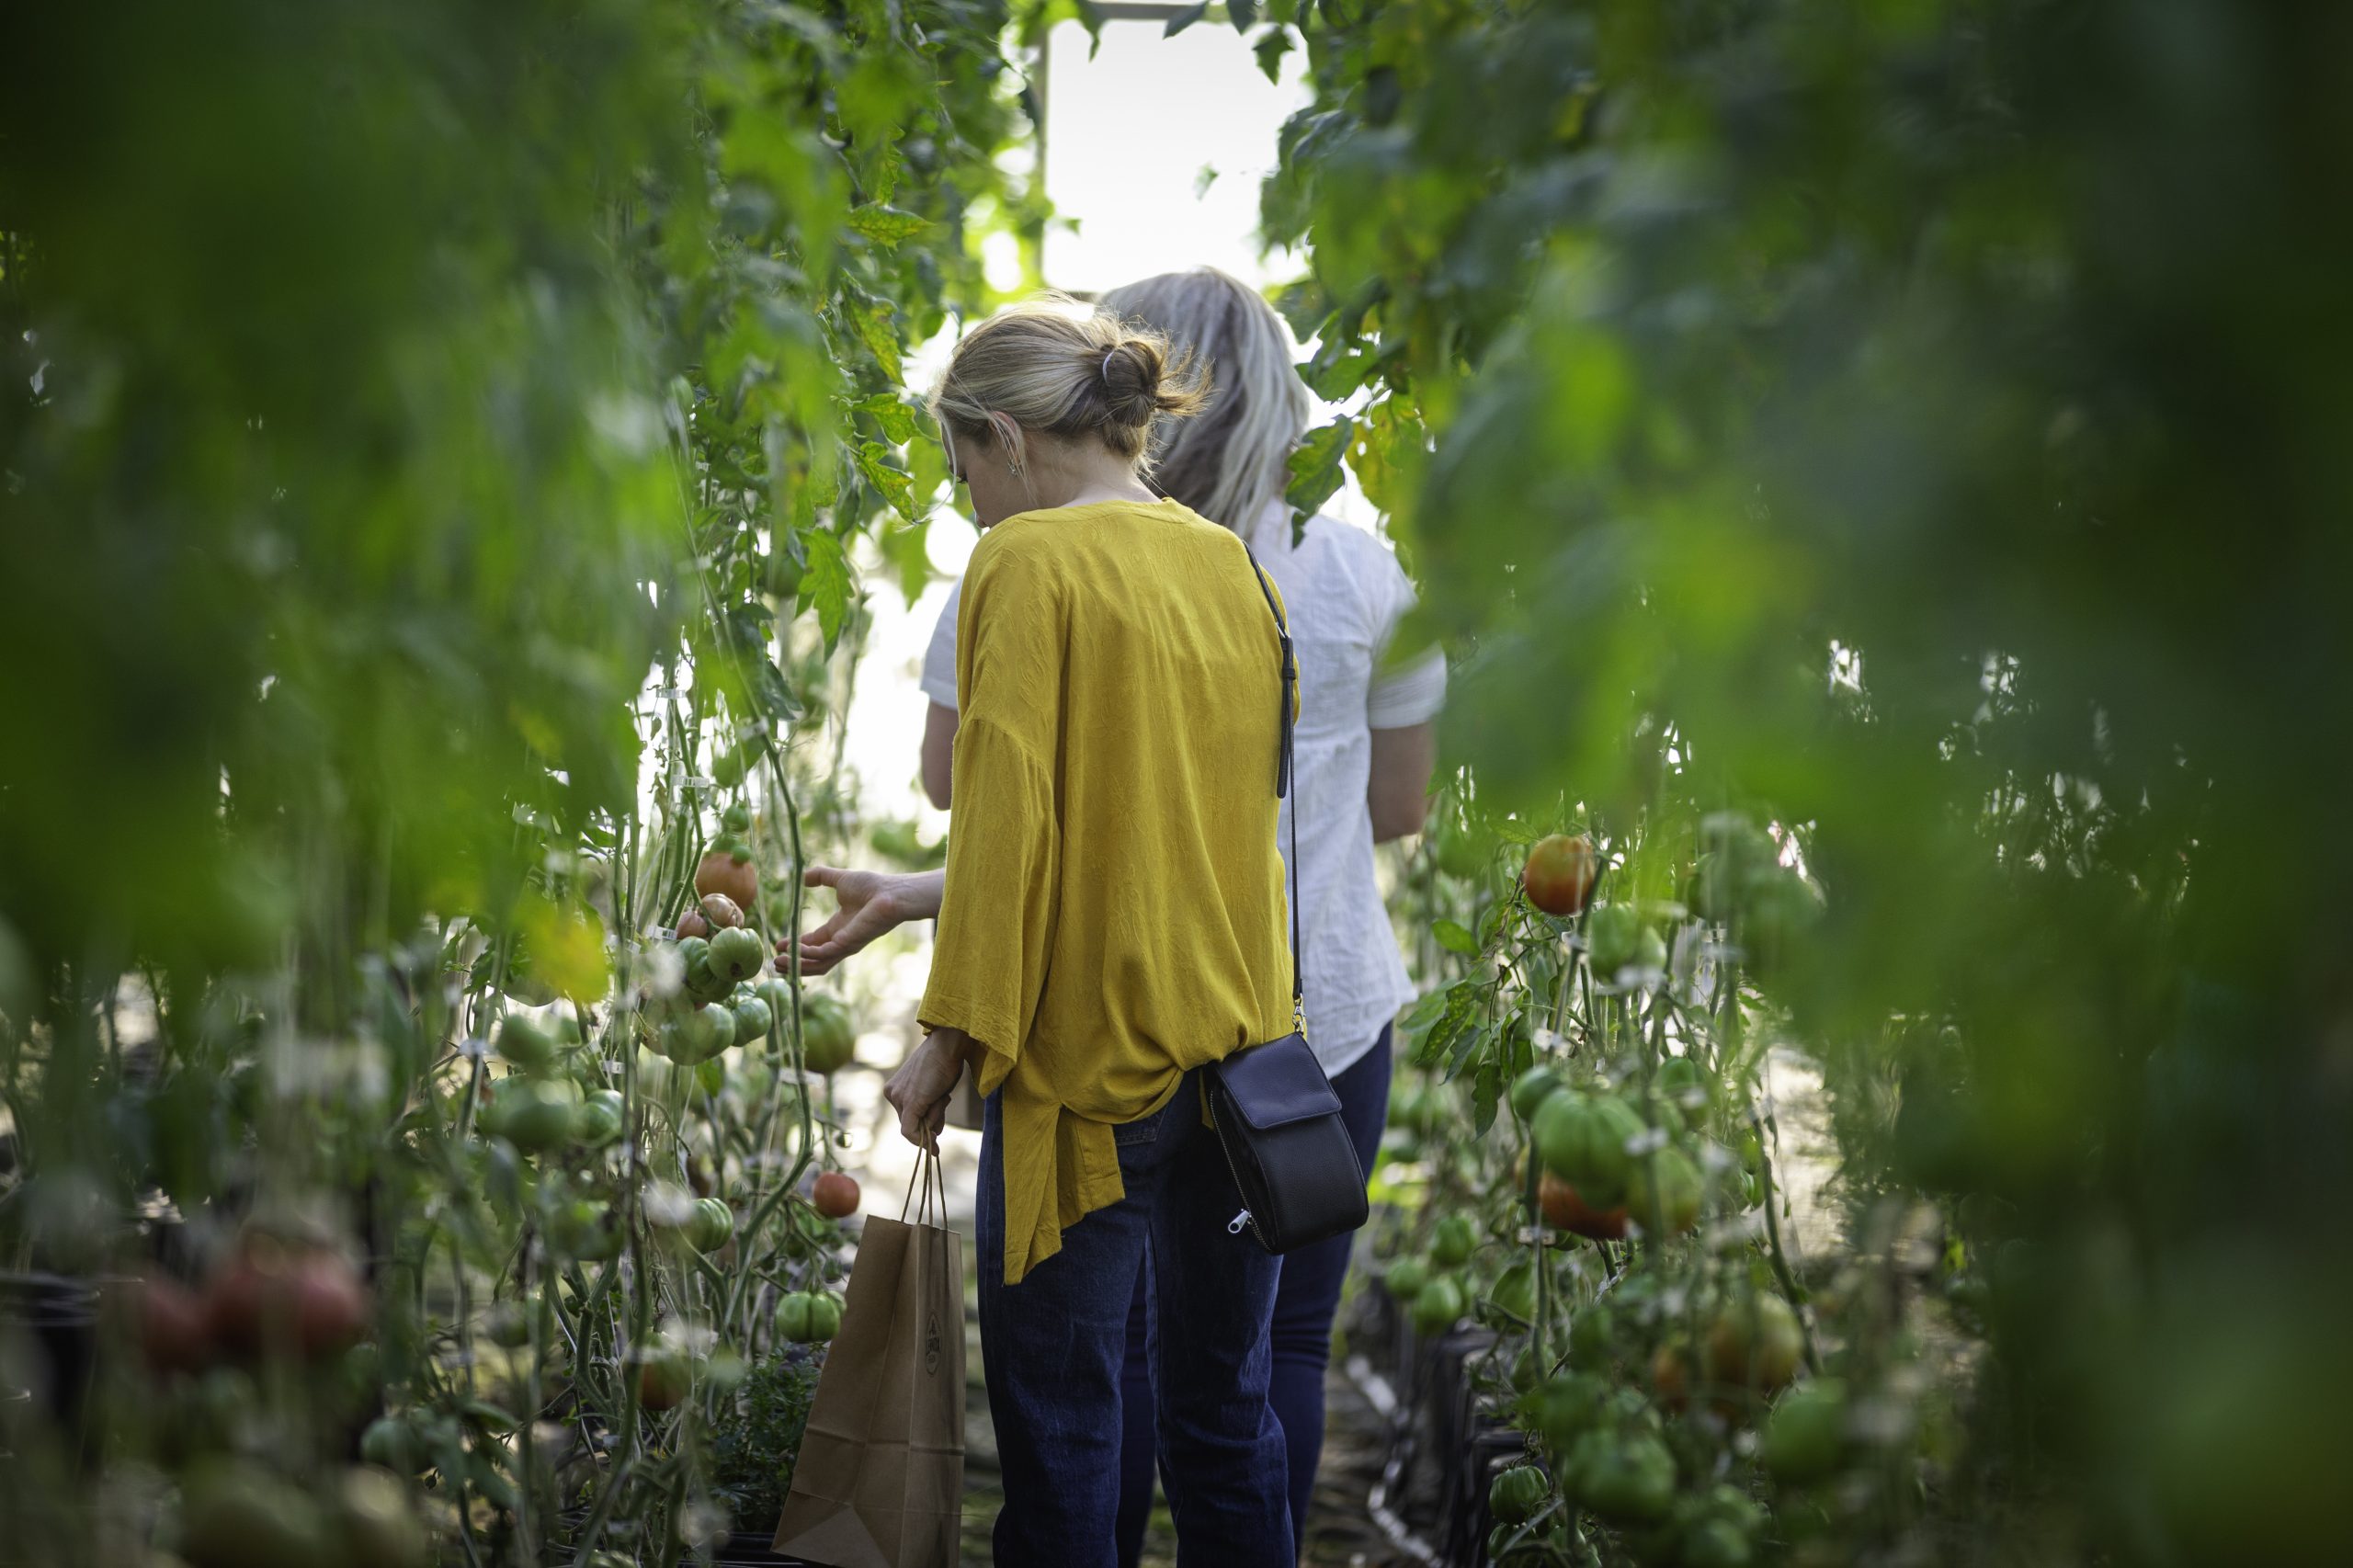 Two ladies walking in a green house between rows of tomato plants